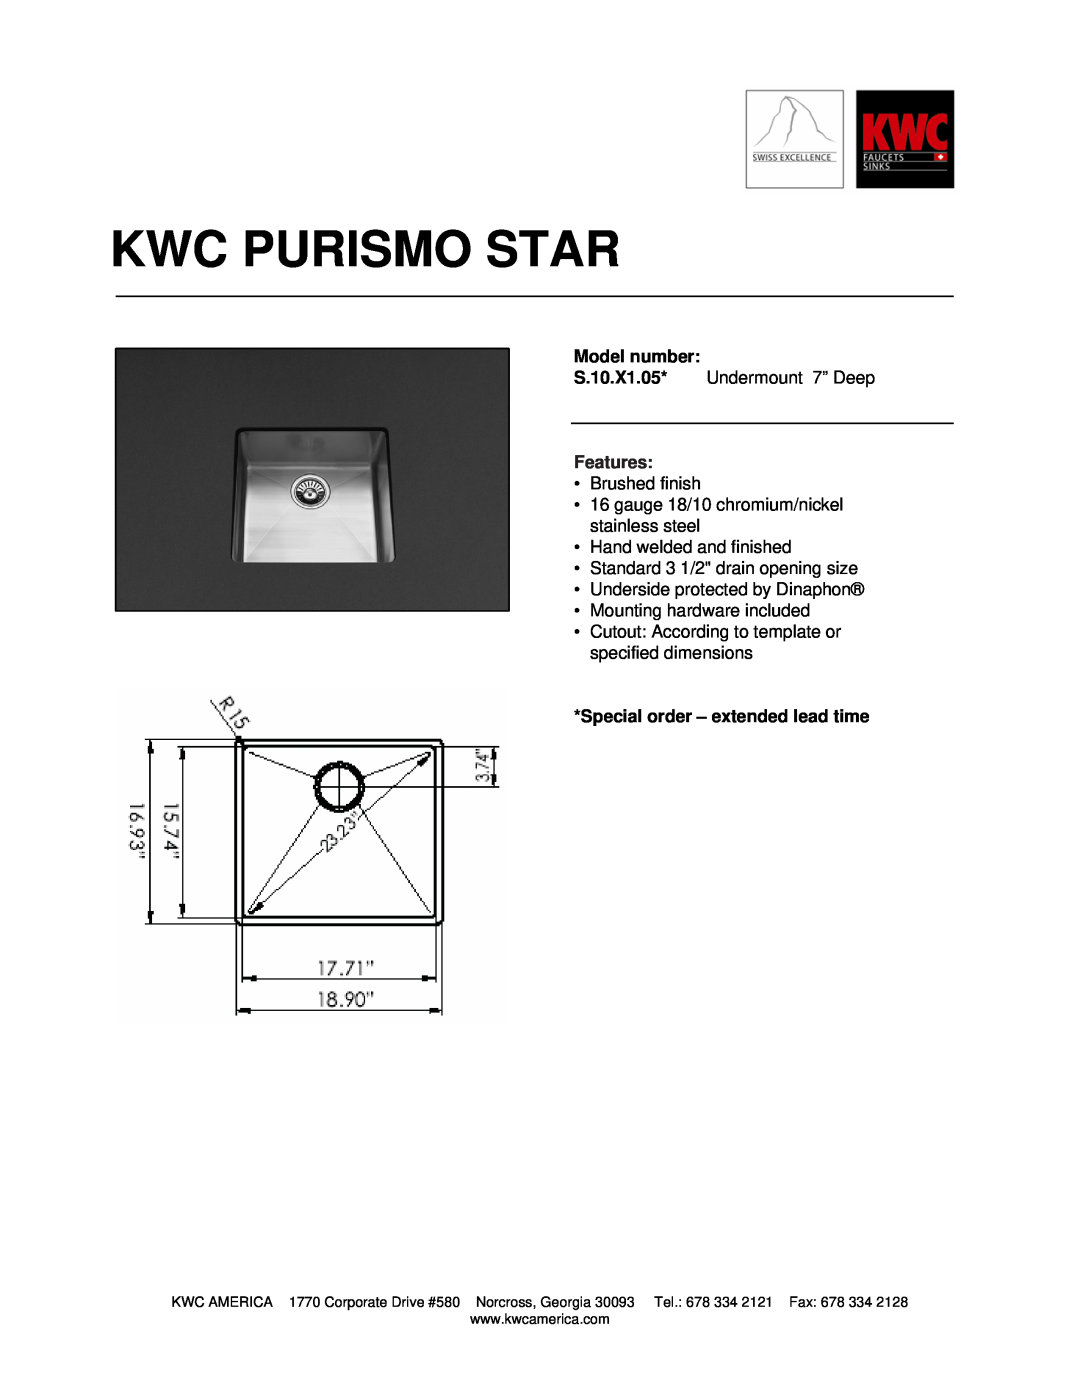 KWC S.10.X1.05* dimensions Kwc Purismo Star, Model number, Features, Special order - extended lead time 